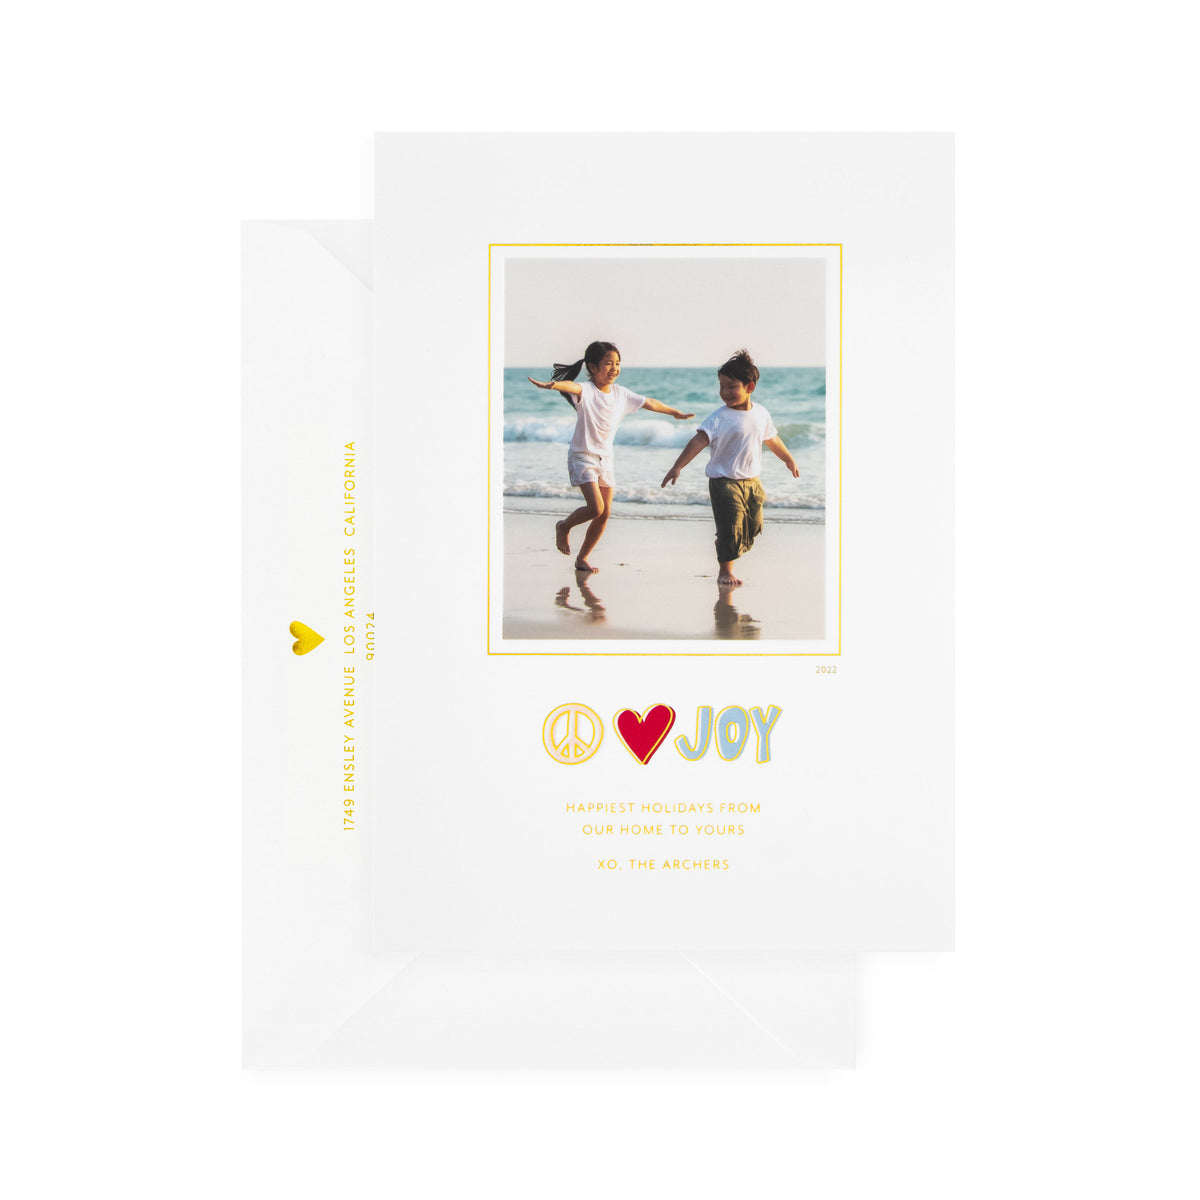 white card with photo and multicolor text, white envelope with gold text